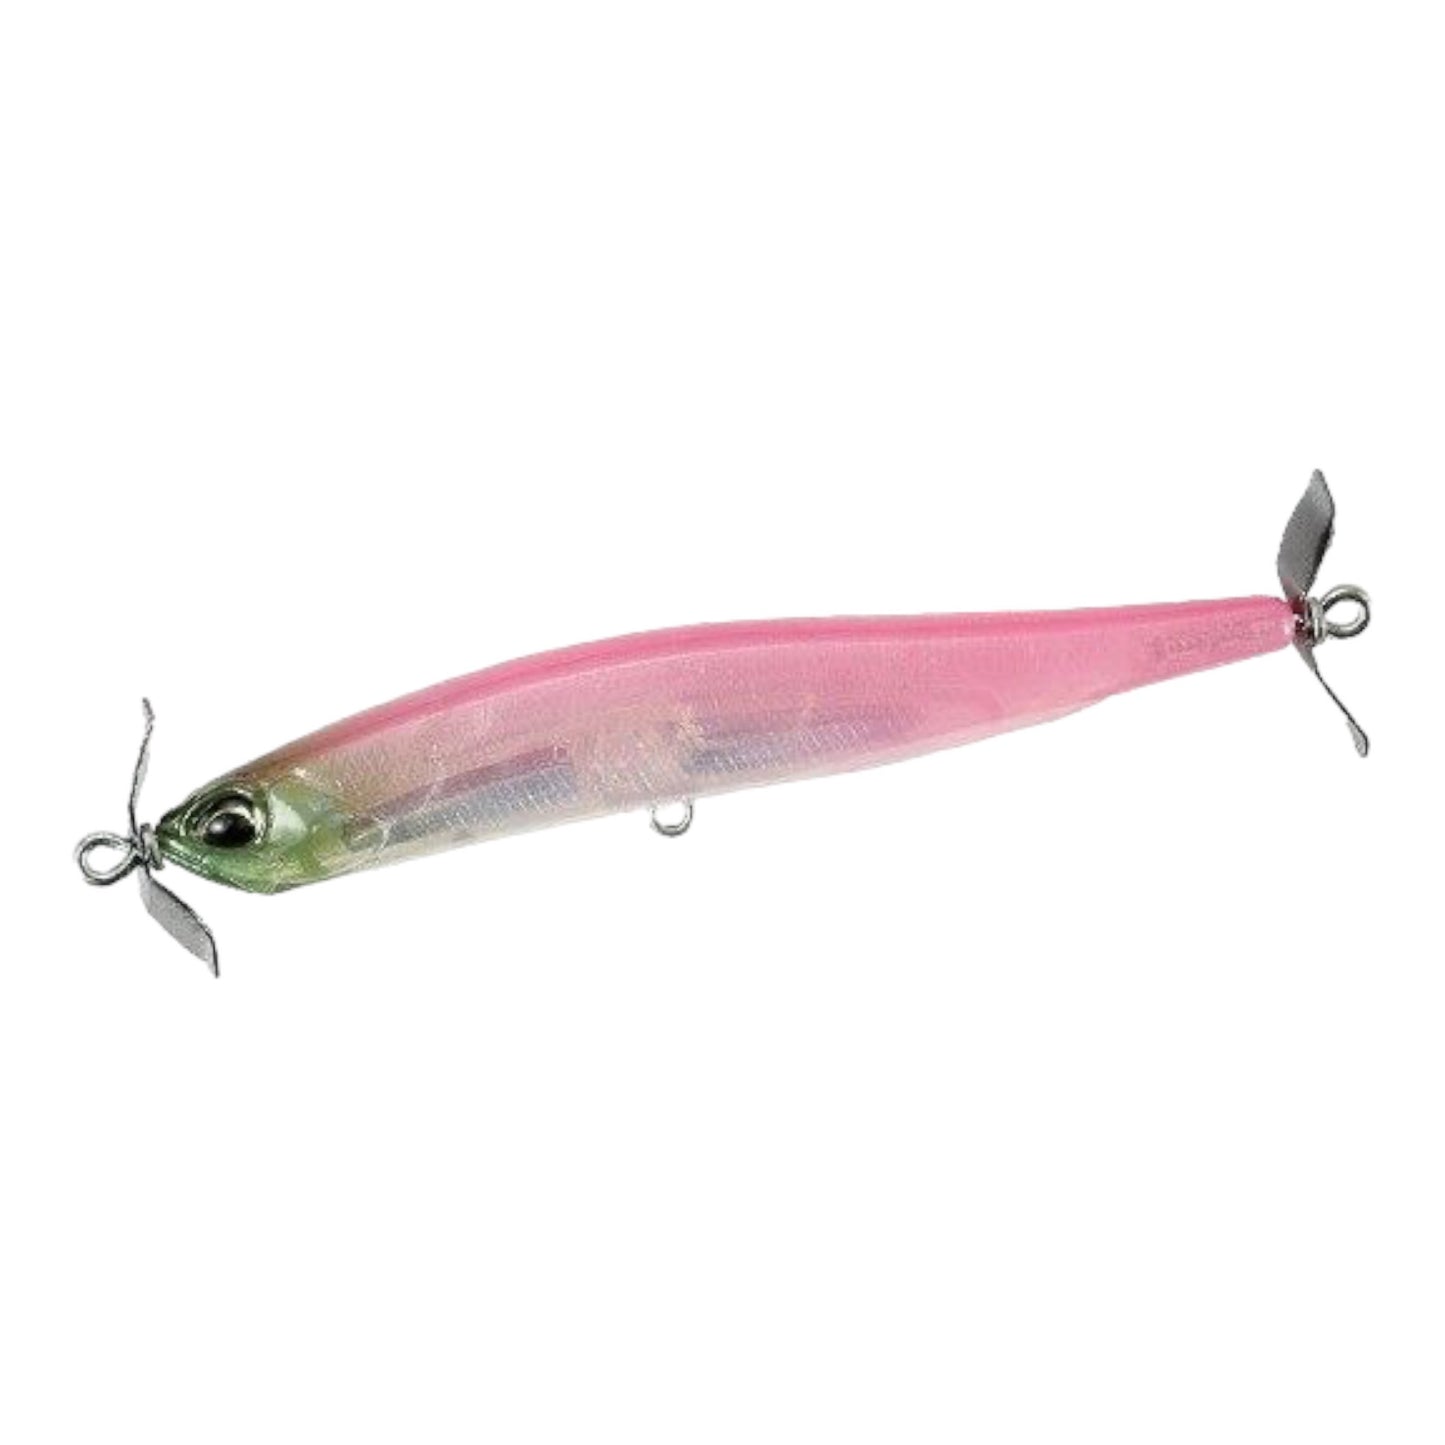 DUO Realis I-Class Series Spinbait 80